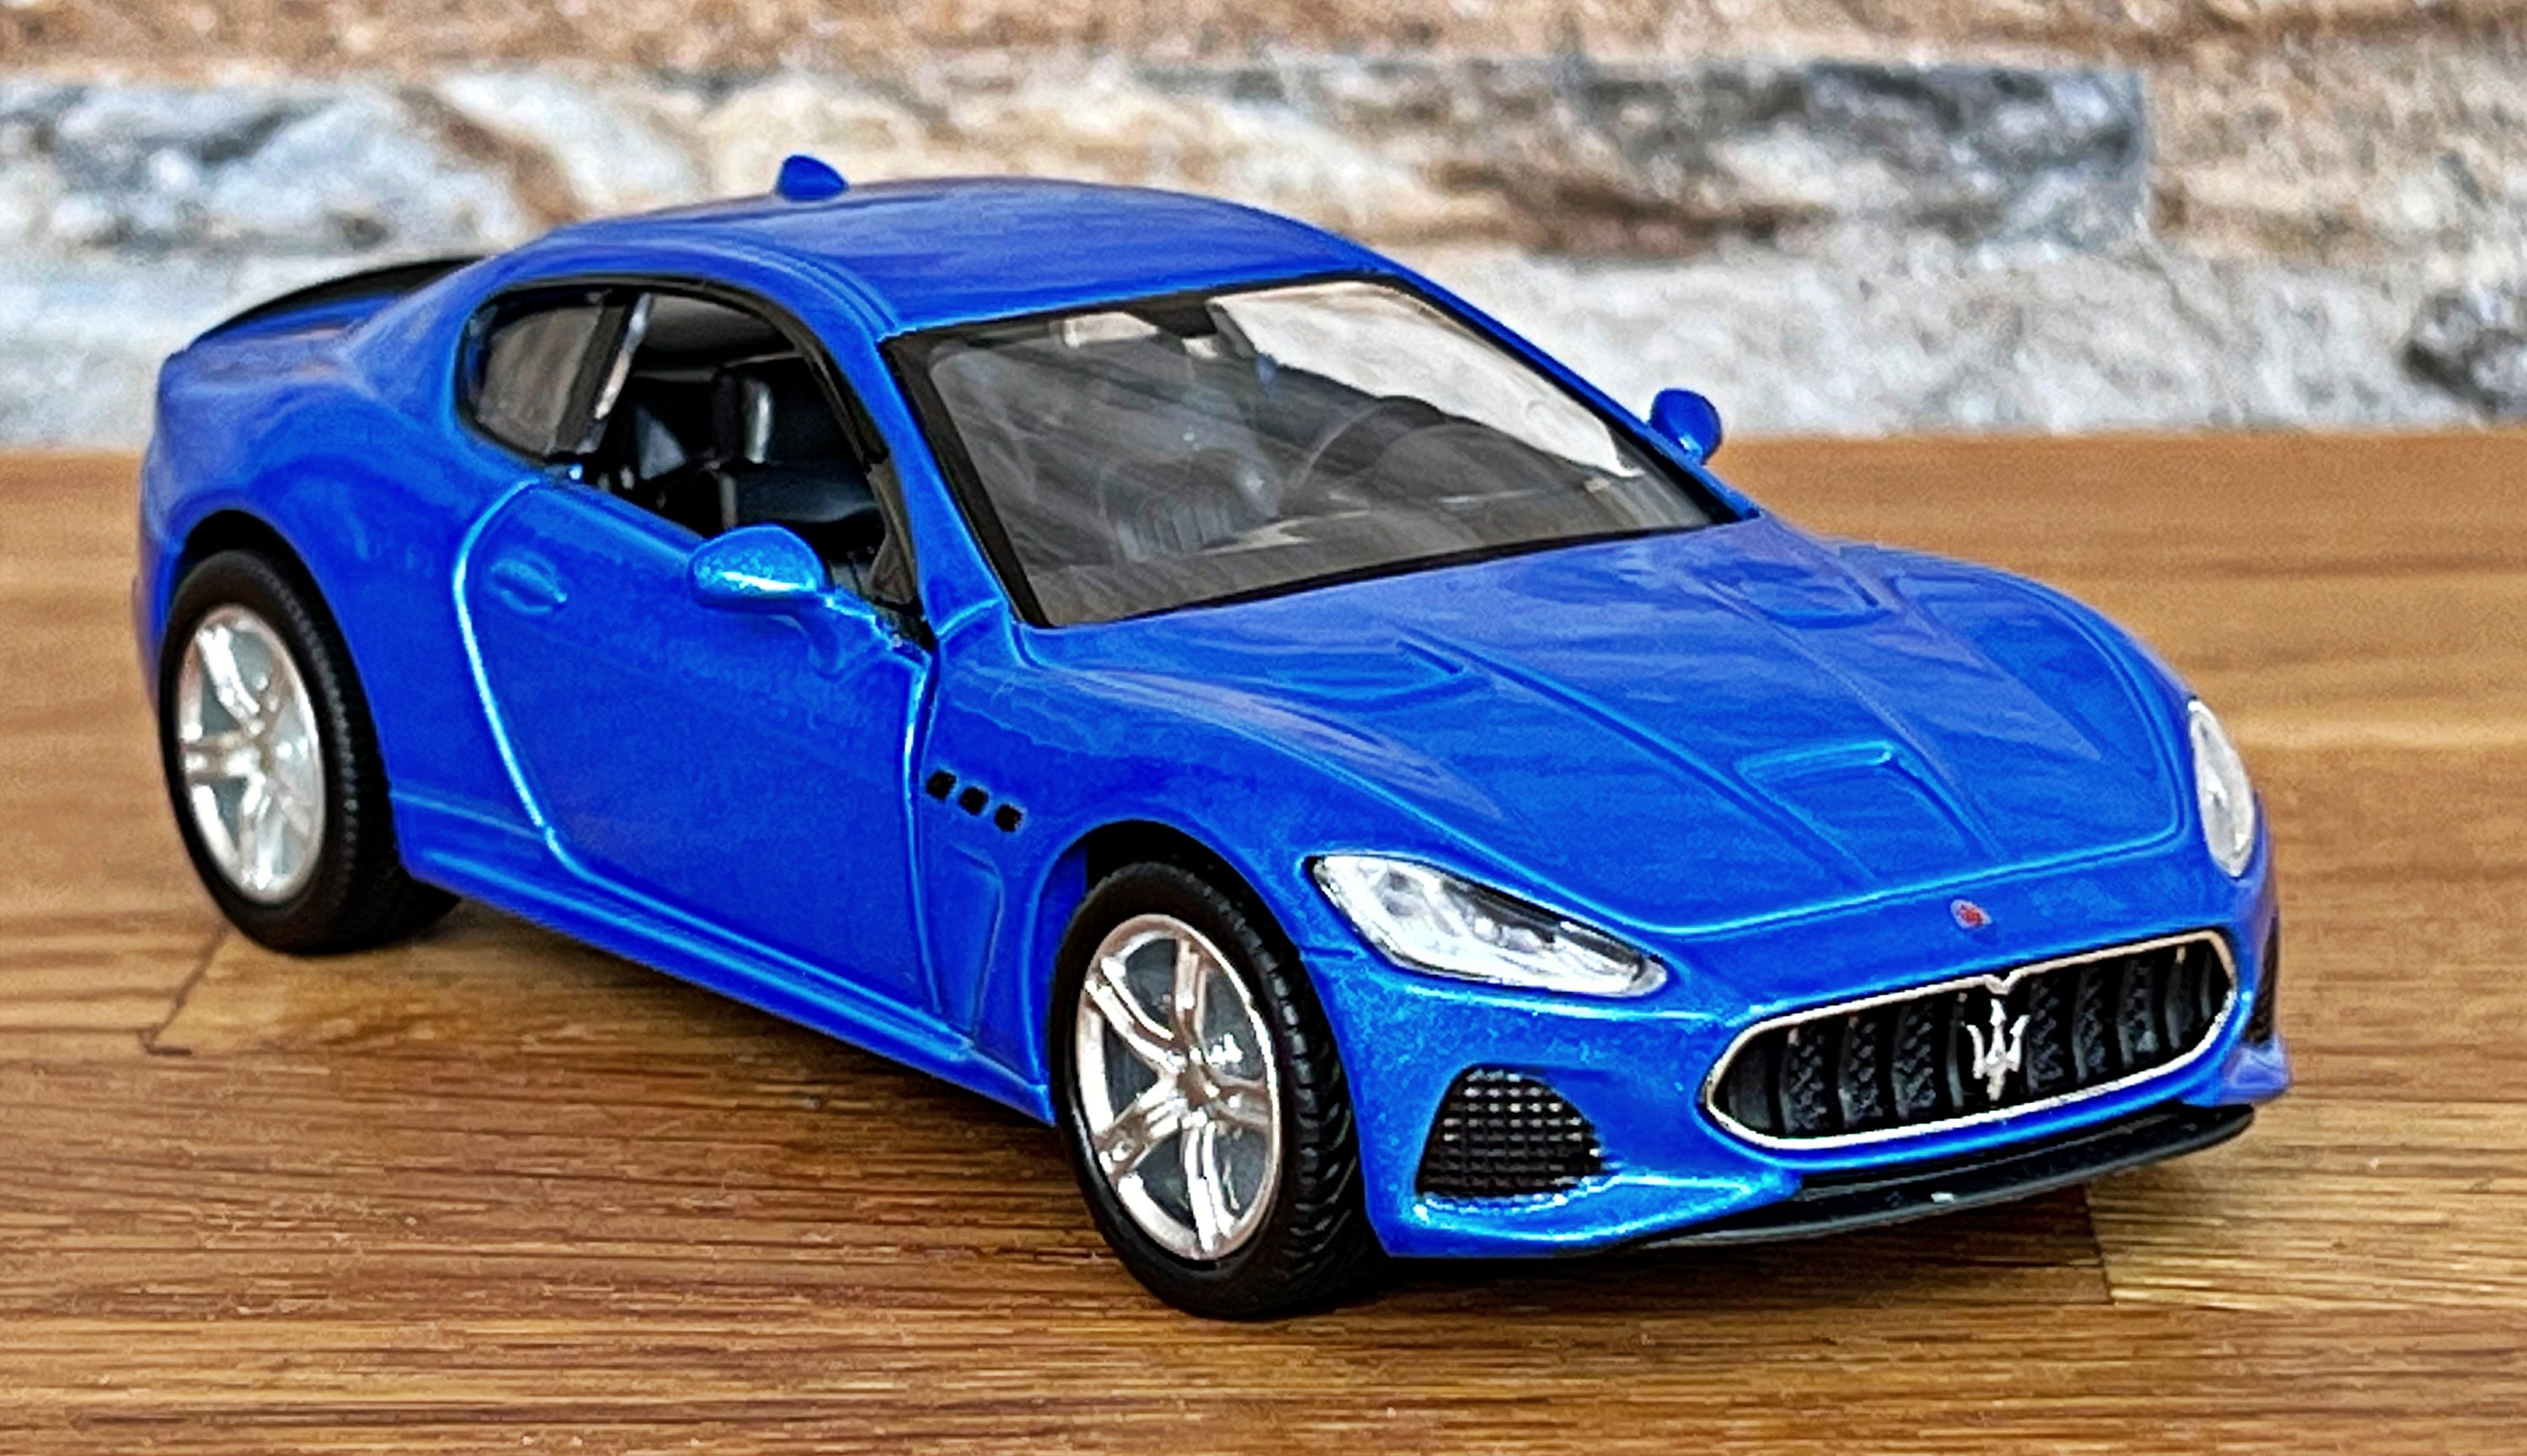 1:36 Metal Diecast Car Model Repilca Maserati Gran Turismo MC Scale  Miniature Collection Vehicle Hobby Kid Toy for Boy Xmas Gift